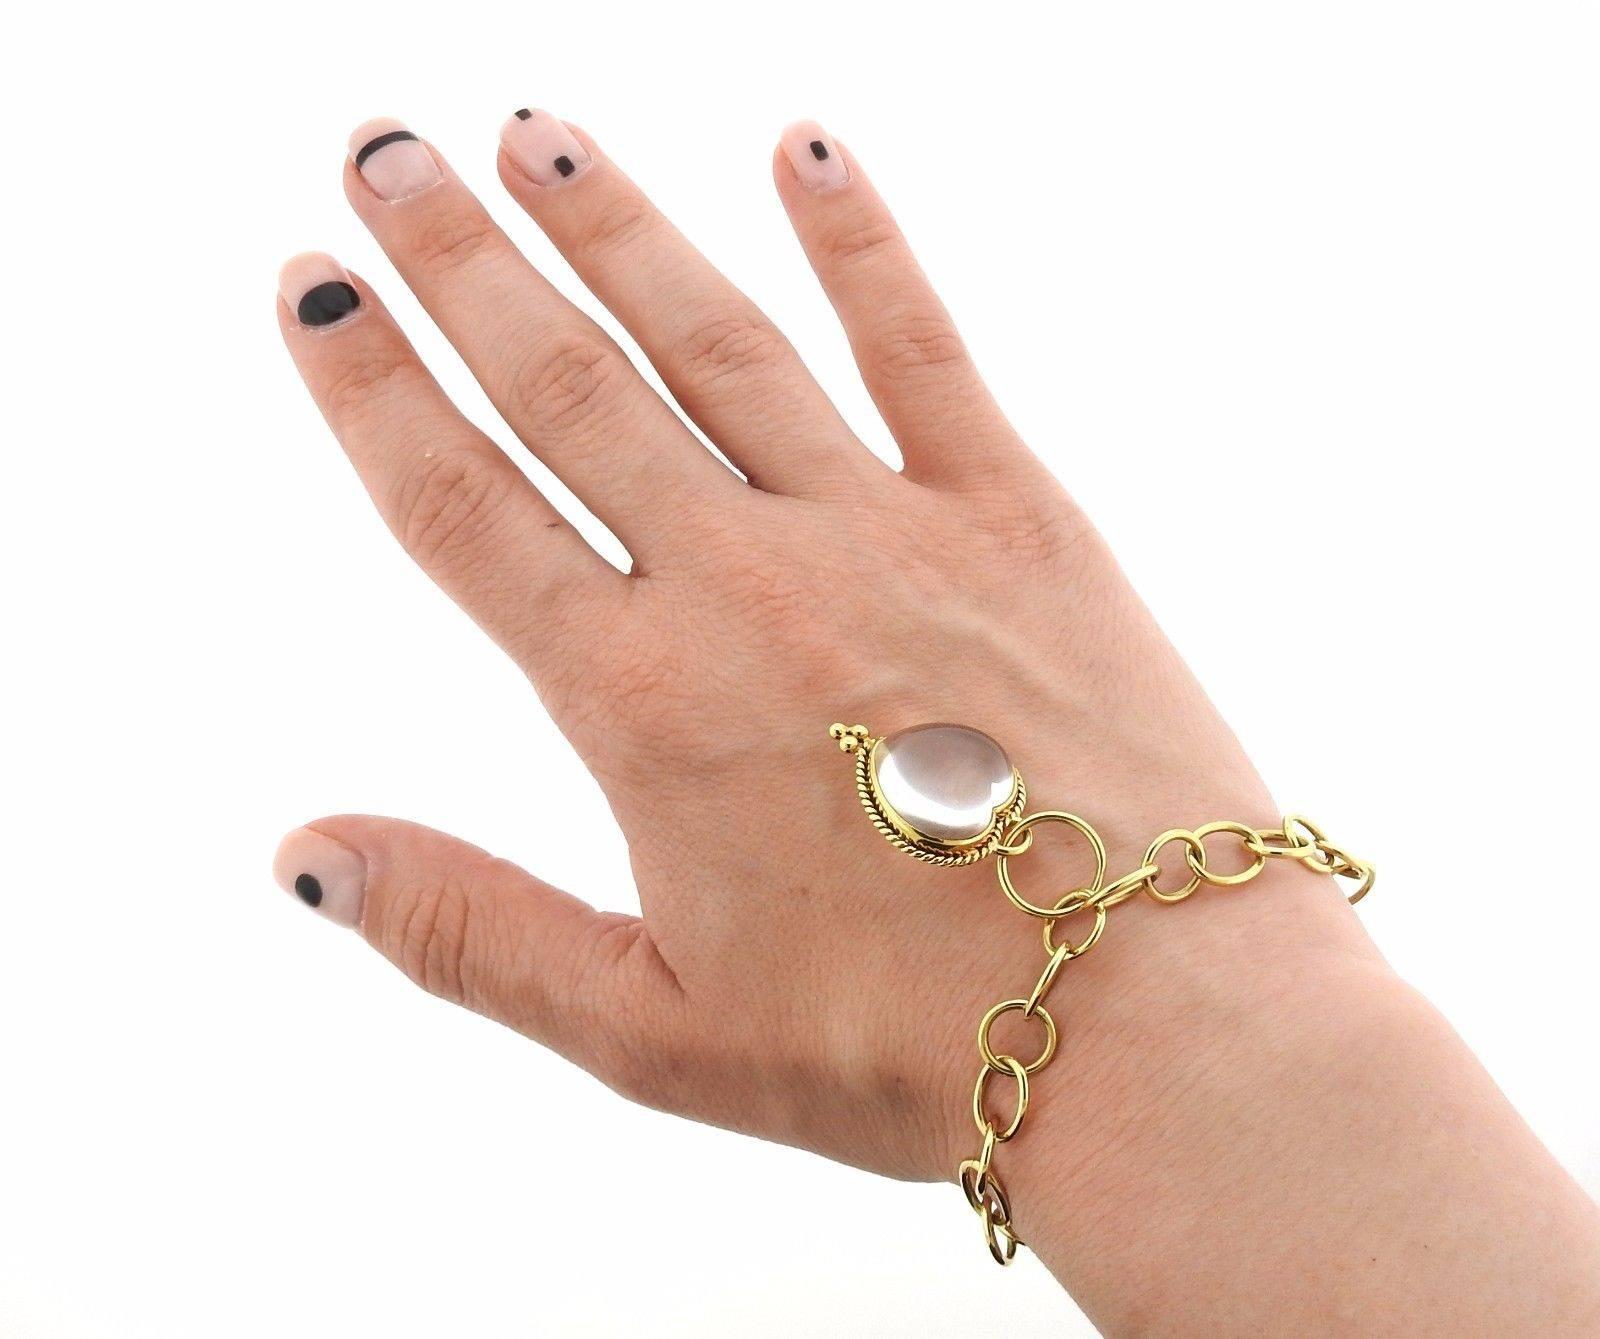 An 18k yellow gold charm bracelet by Temple St. Clair.  The bracelet is 7 1/8" long and 9mm wide.  The charm measures 29mm x 22mm. Marked: Temple Hallmark, 750.  The weight of the piece is 21.5 grams.